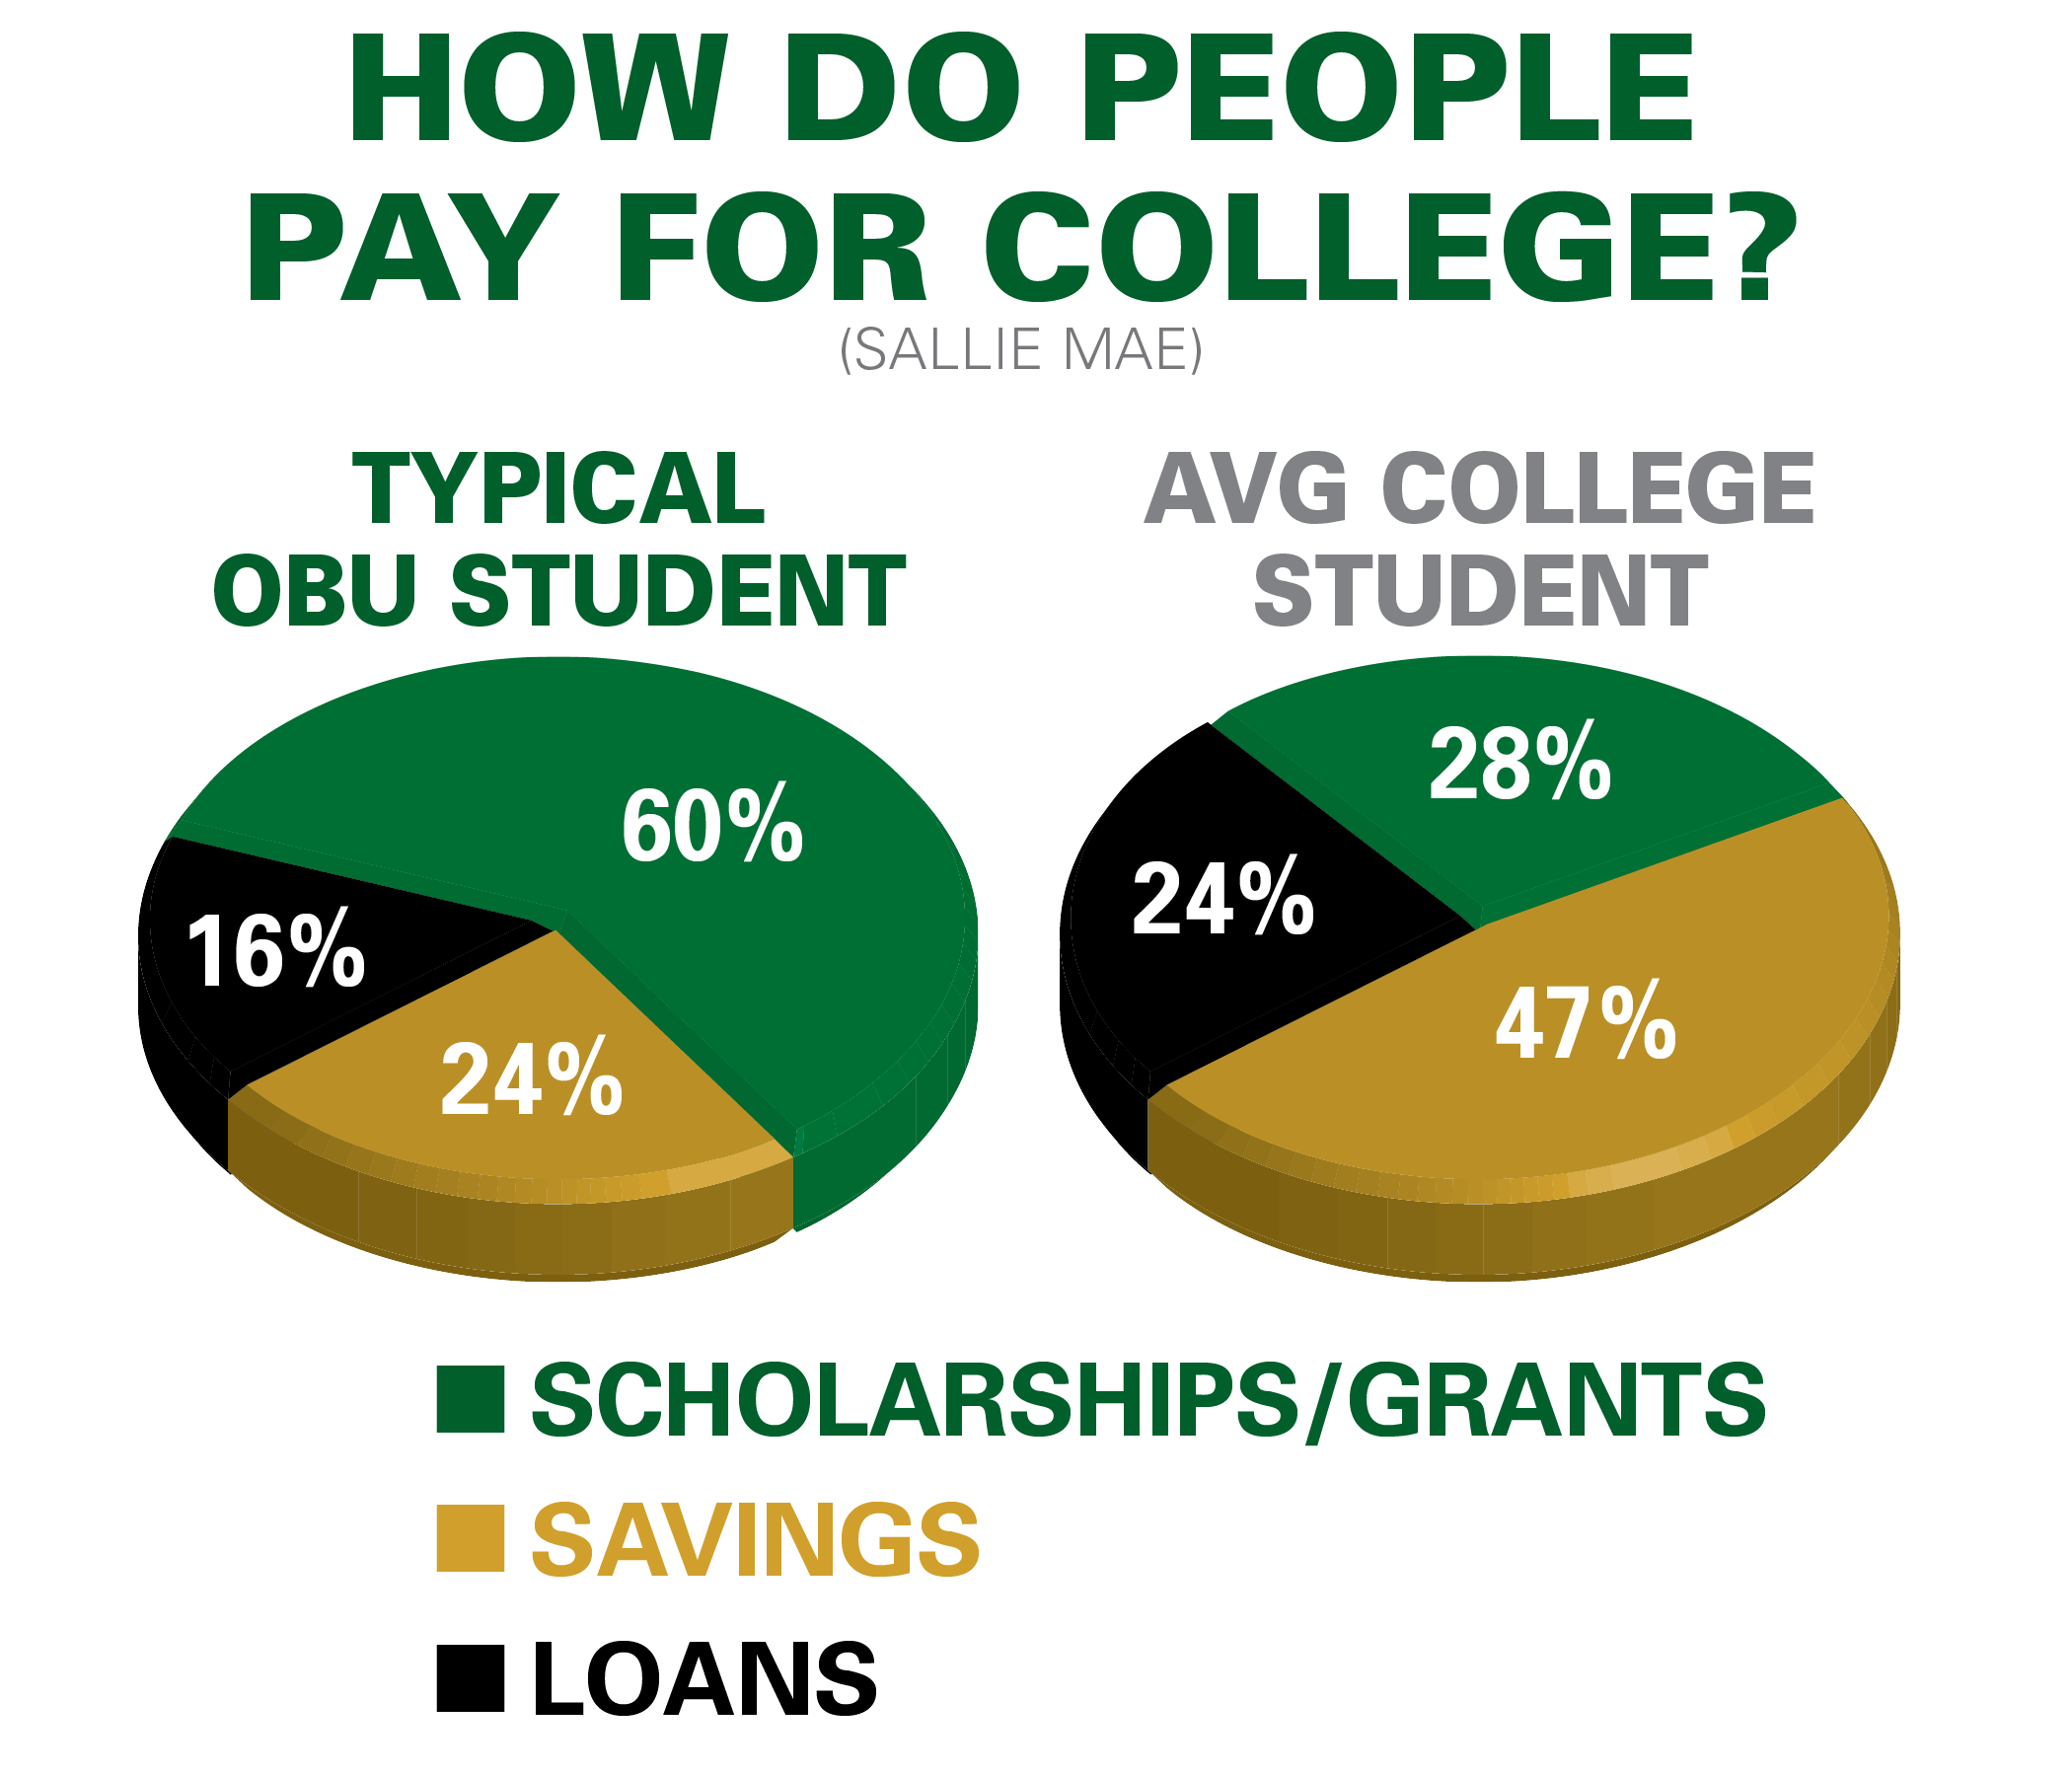 According to Sallie Mae, scholarships and grants cover more of an OBU student's expenses than the typical college student.